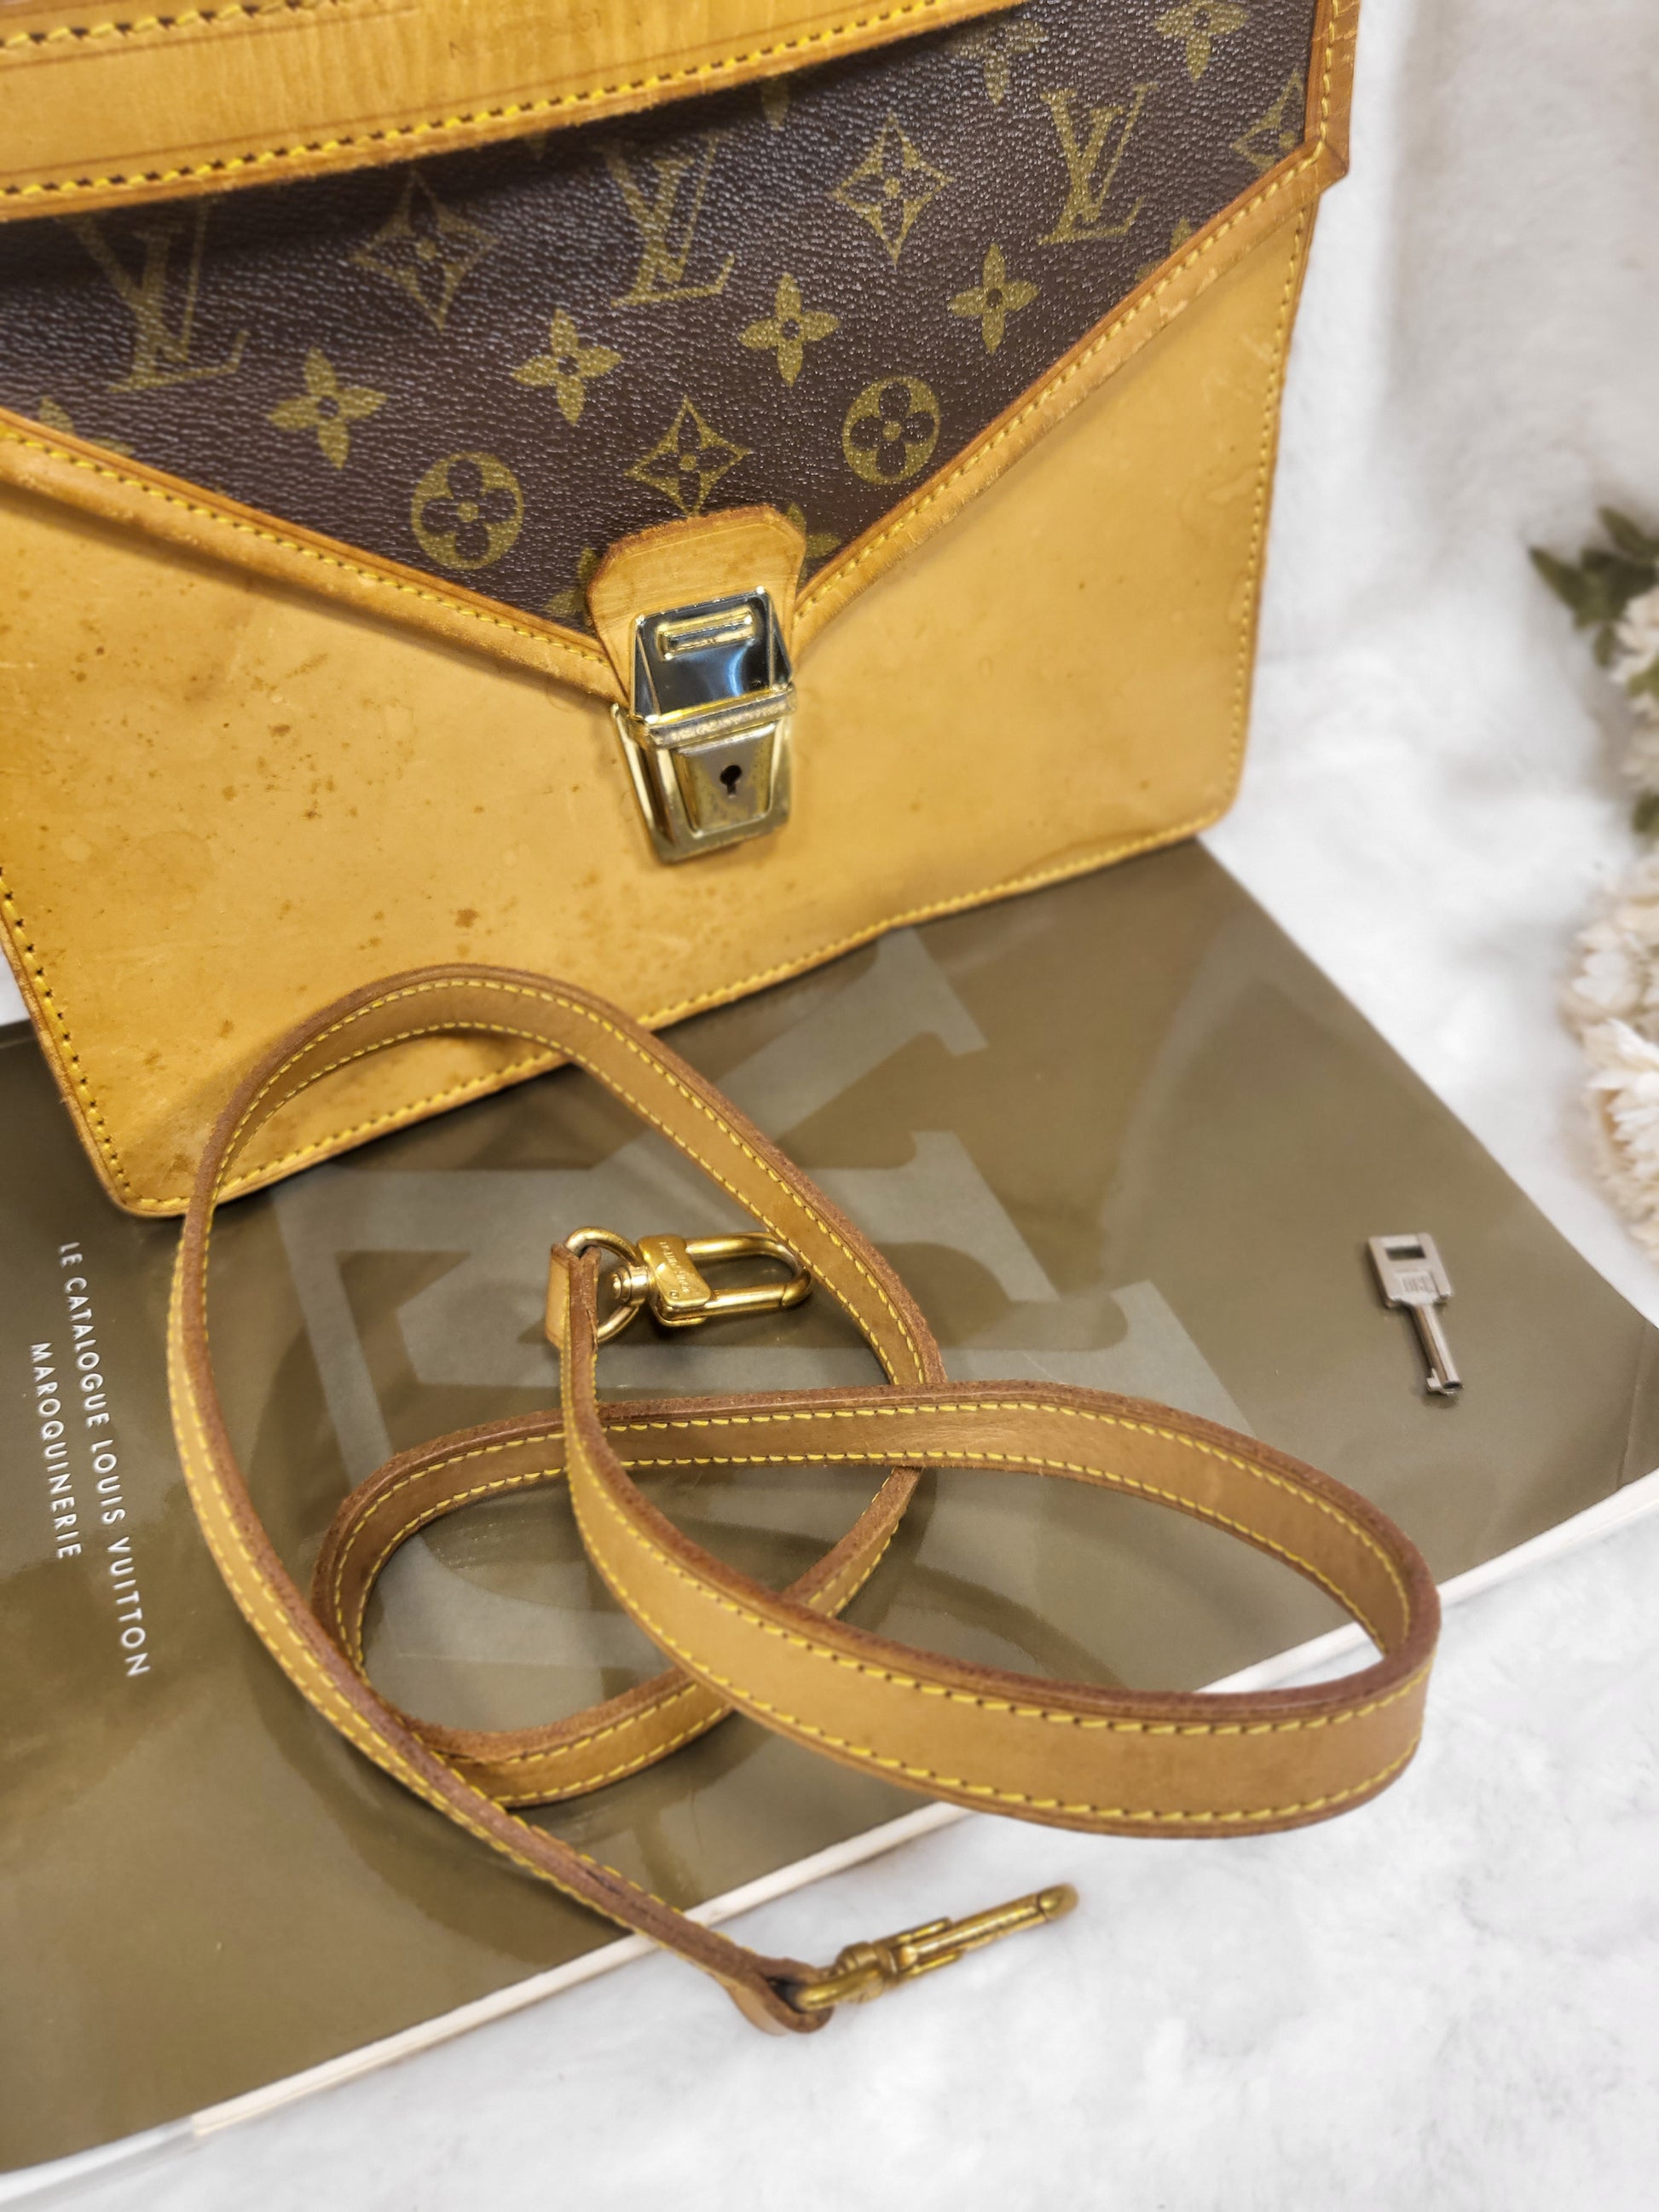 Authentic pre-owned Louis Vuitton sac biface calfskin hinomoto limited  edition crossbody shoulder bag